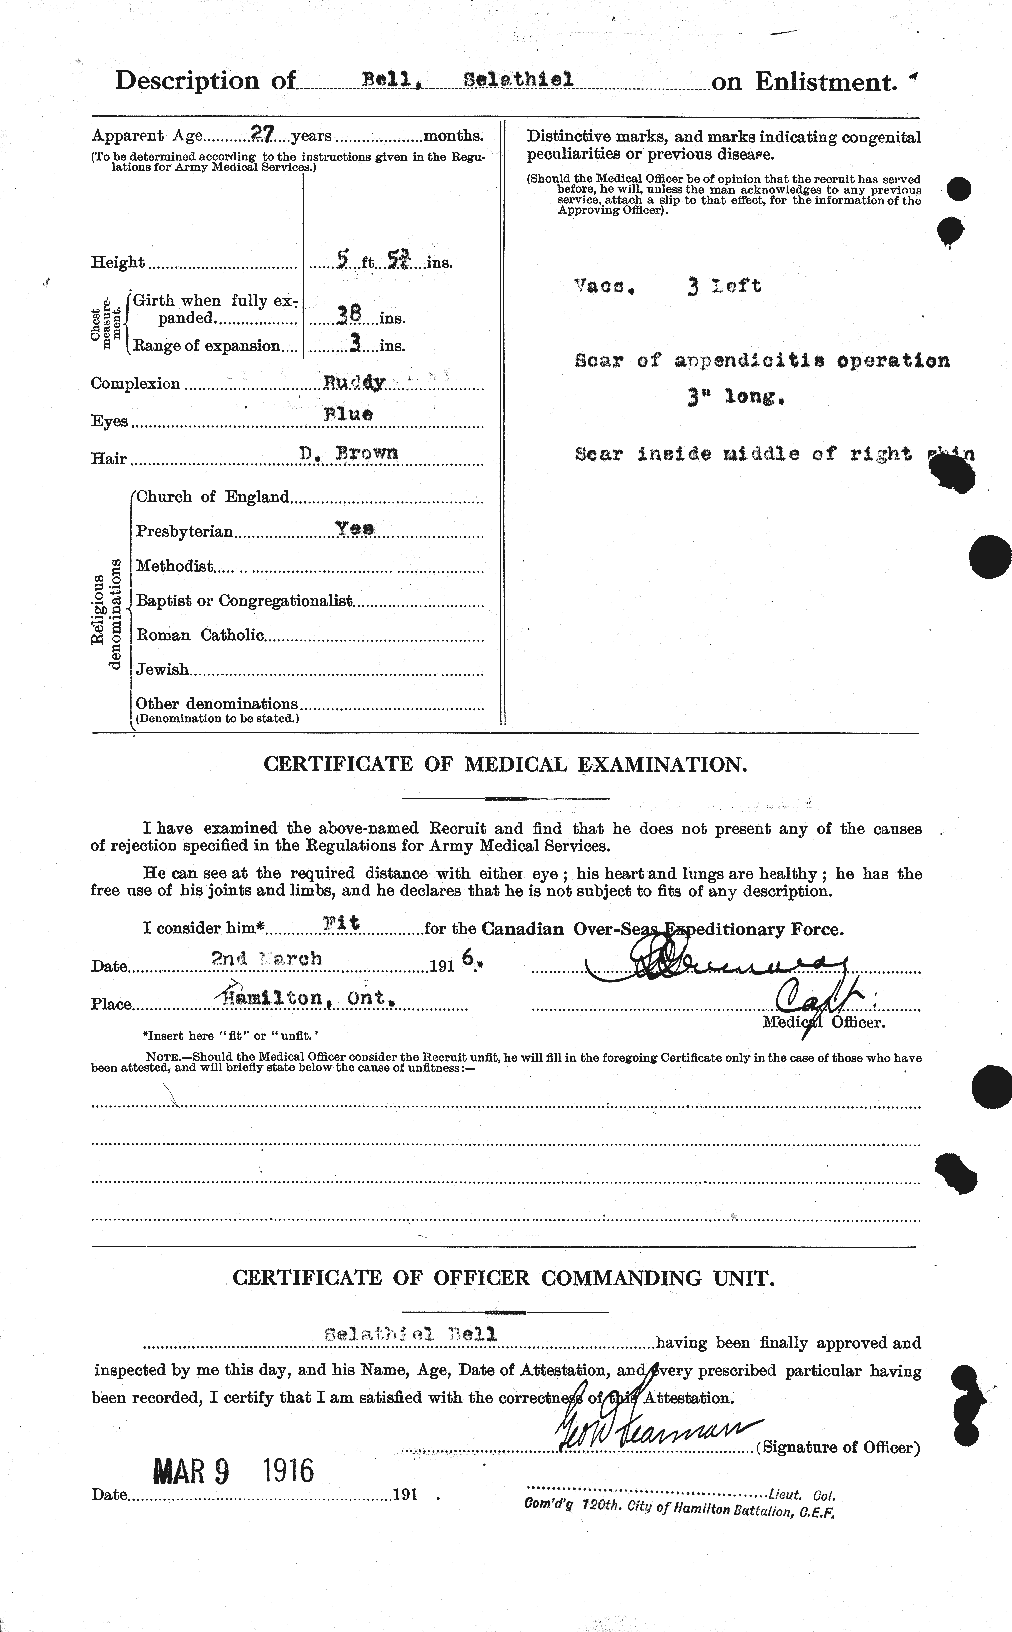 Personnel Records of the First World War - CEF 234721b